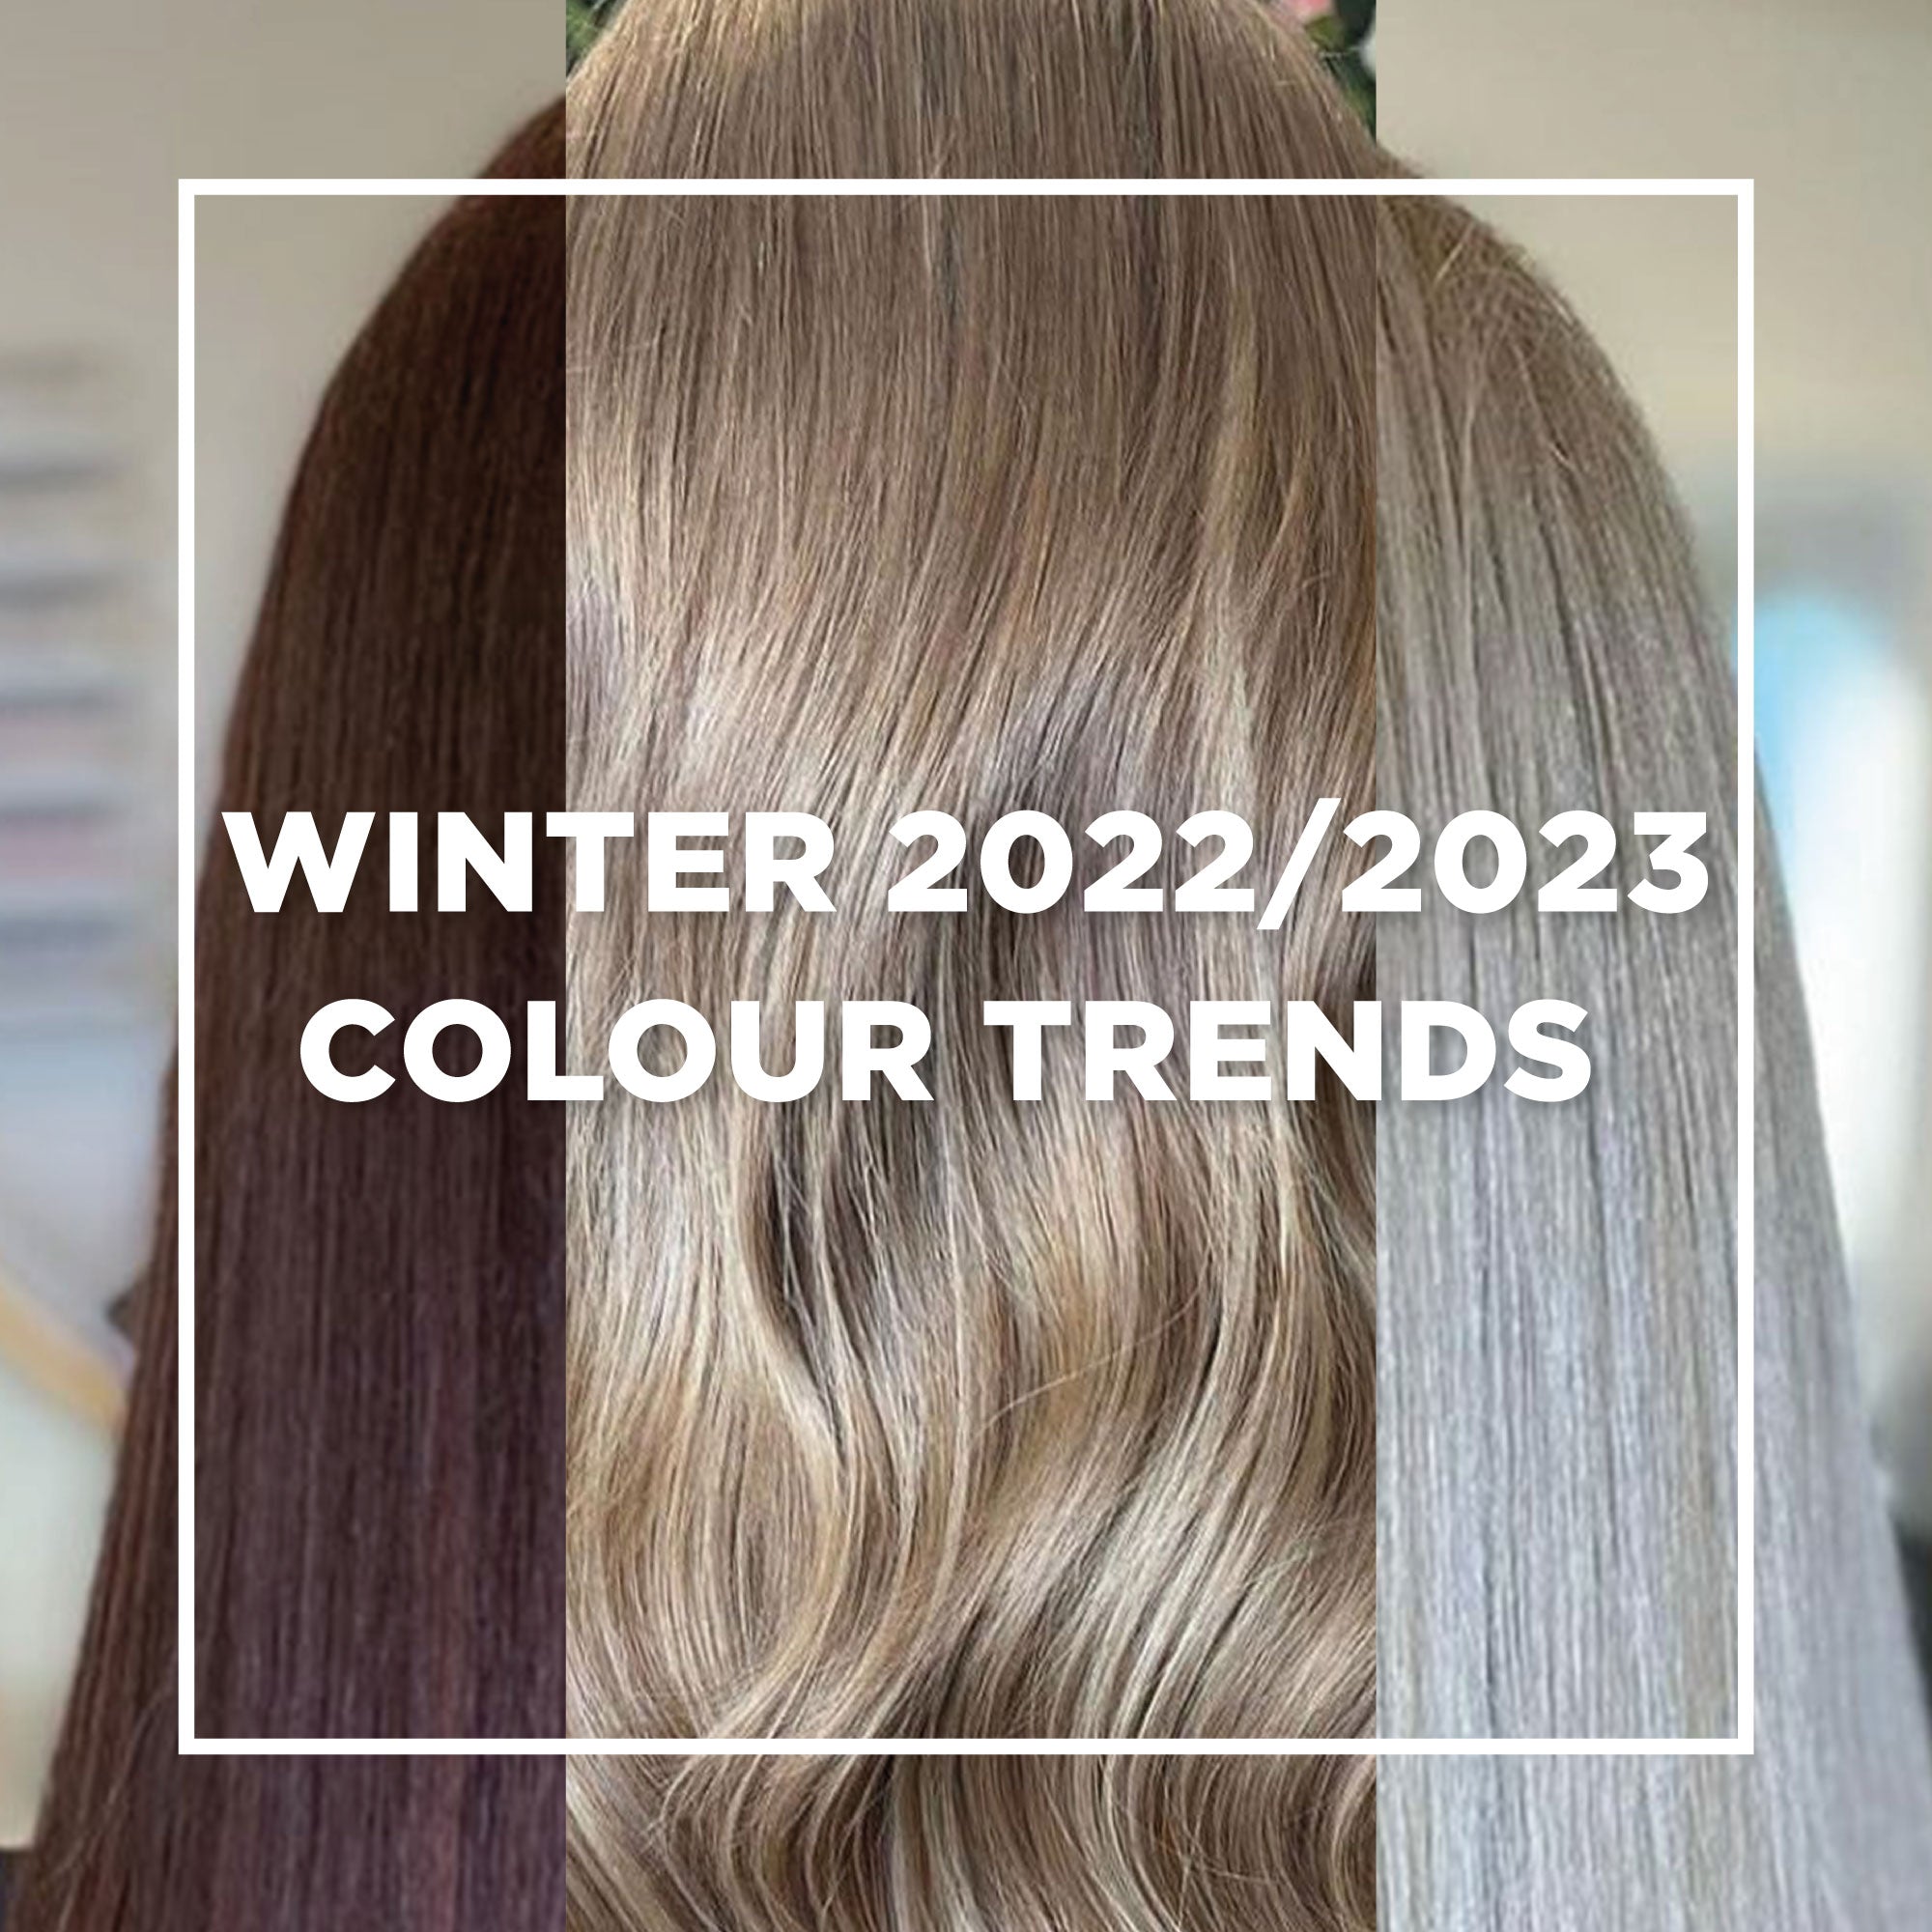 36 Chic Winter Hair Colour Ideas  Styles For 2021  Blonde Balayage with  Waves